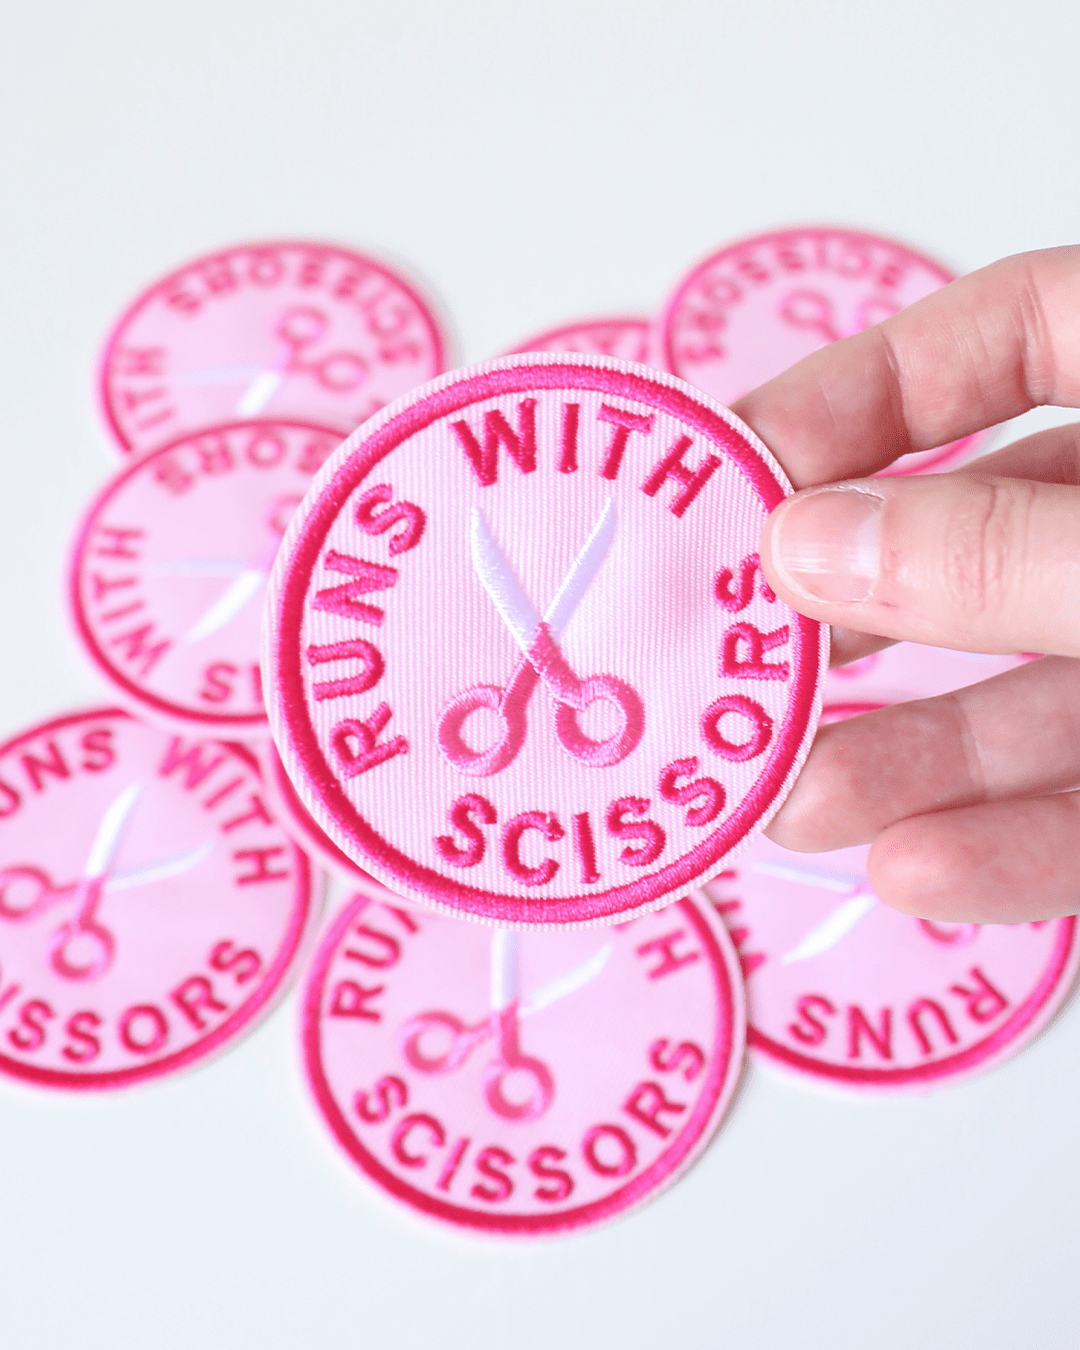 Runs With Scissors Patch - Runs With Scissors Patch - Funny Embroidered Iron On Clothes Patch